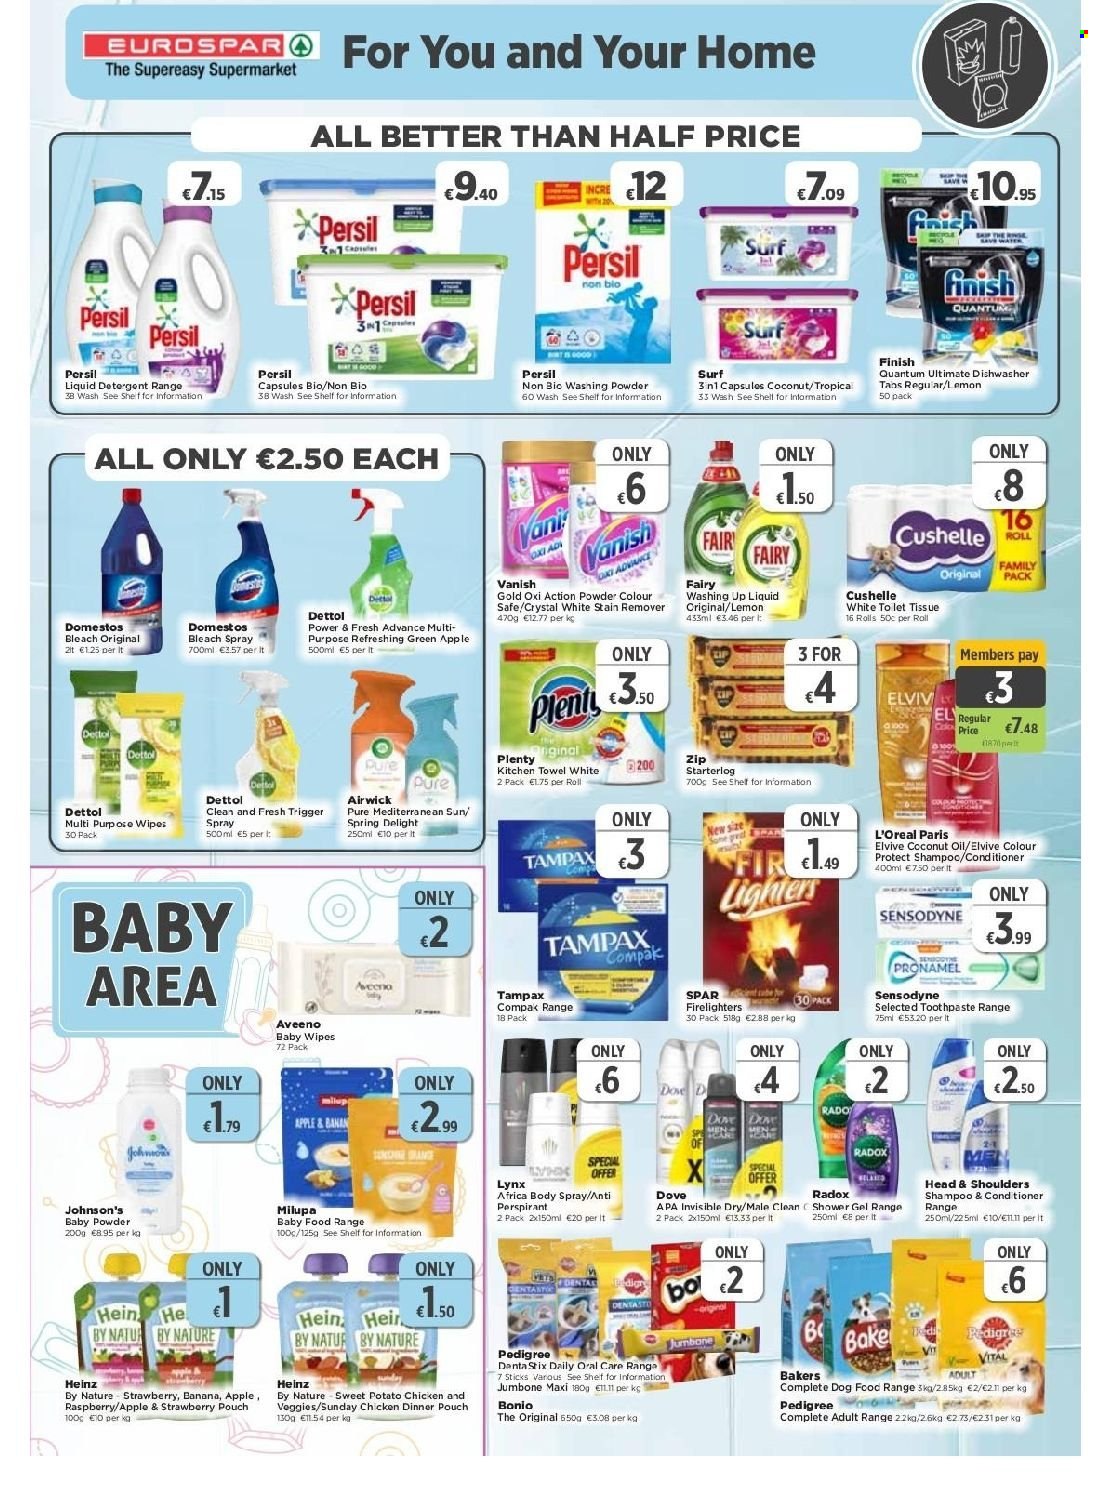 thumbnail - EUROSPAR offer  - 21.10.2021 - 10.11.2021 - Sales products - coconut, Heinz, oil, wipes, baby wipes, Johnson's, Aveeno, Dettol, baby powder, Dove, tissues, Plenty, kitchen towels, Cushelle, Domestos, bleach, stain remover, Fairy, Vanish, Persil, Surf, shower gel, Radox, toothpaste, Sensodyne, Tampax, L’Oréal, conditioner, Head & Shoulders, body spray, BIC, firelighter, Air Wick, Bakers. Page 7.